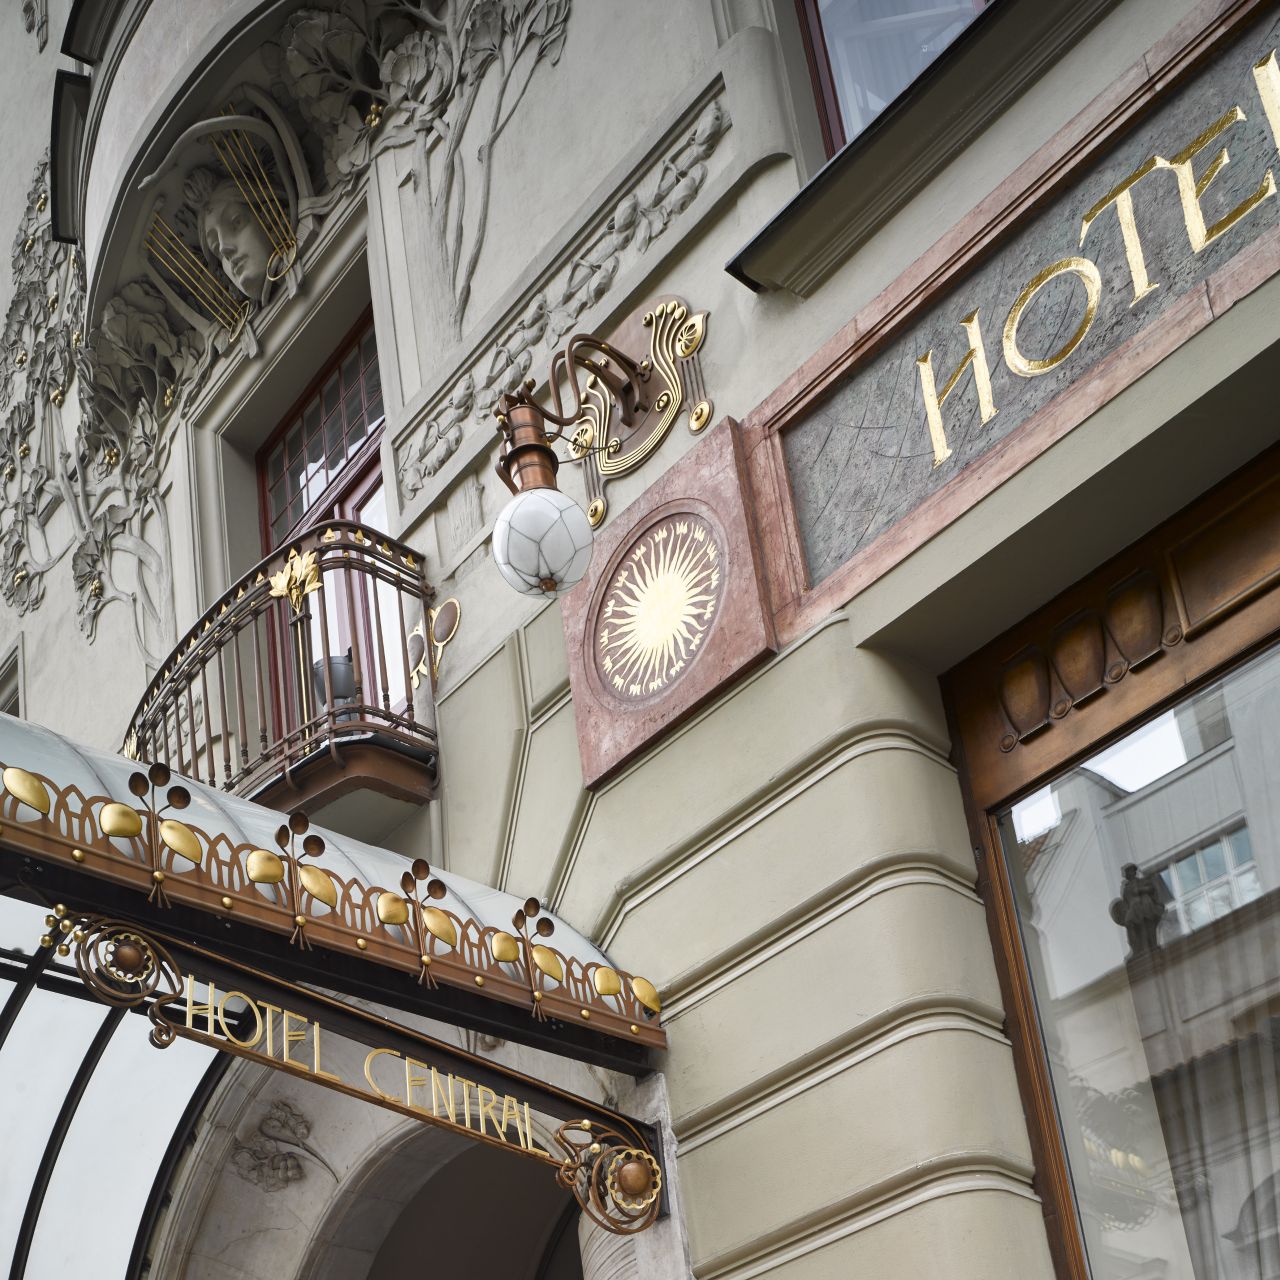 K+K Hotel Central - Prague - Great prices at HOTEL INFO